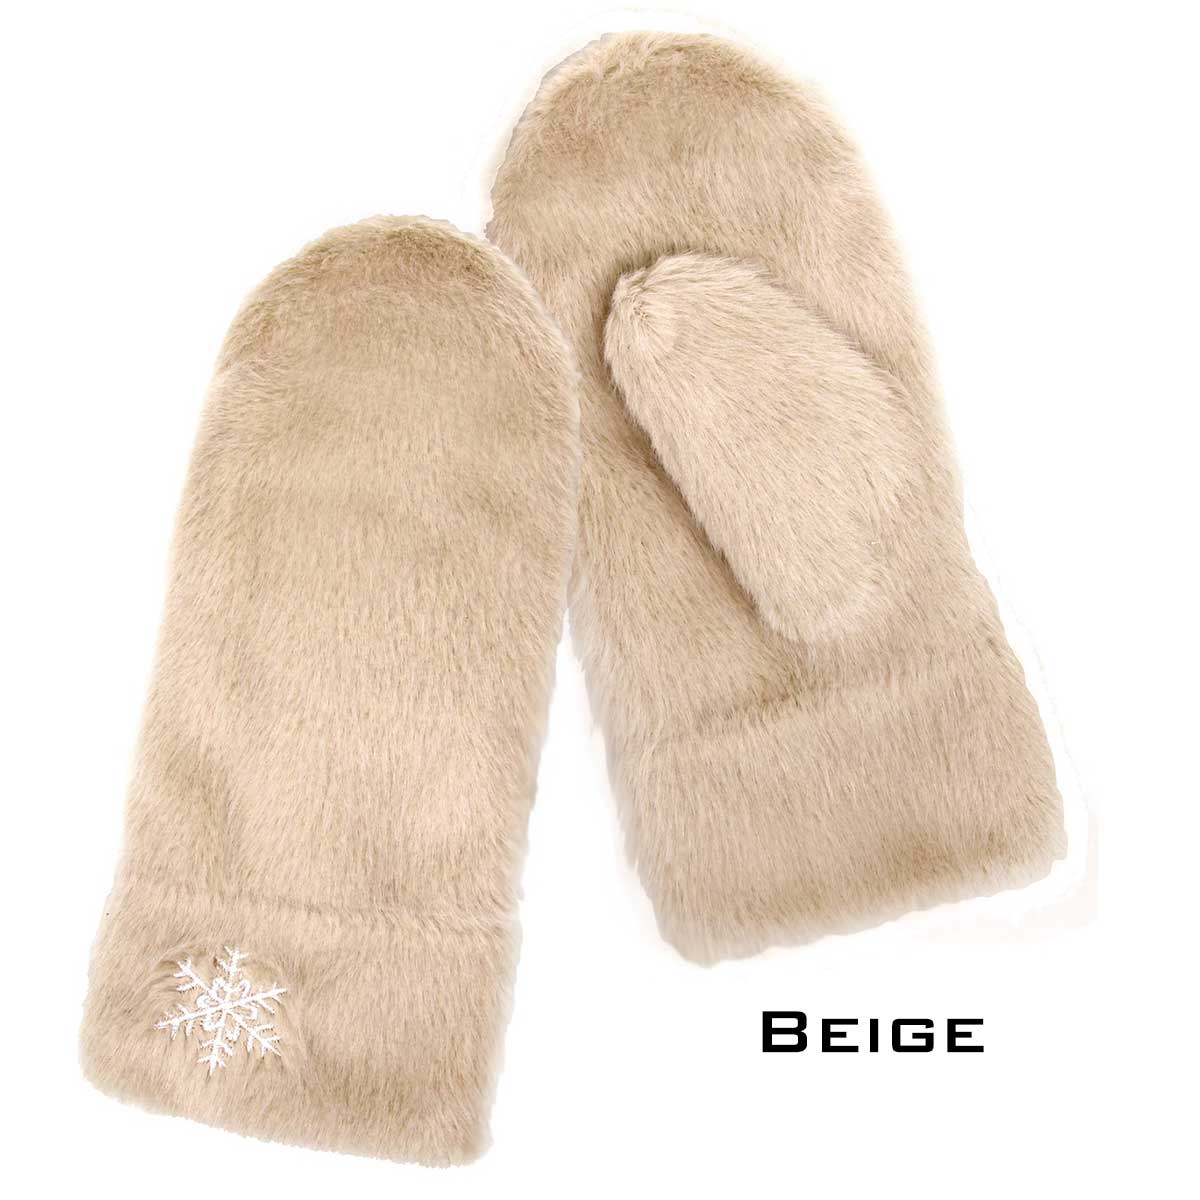 Plush Mittens - 187/222/219/260  187 - Ivory Snowflake - One Size Fits All